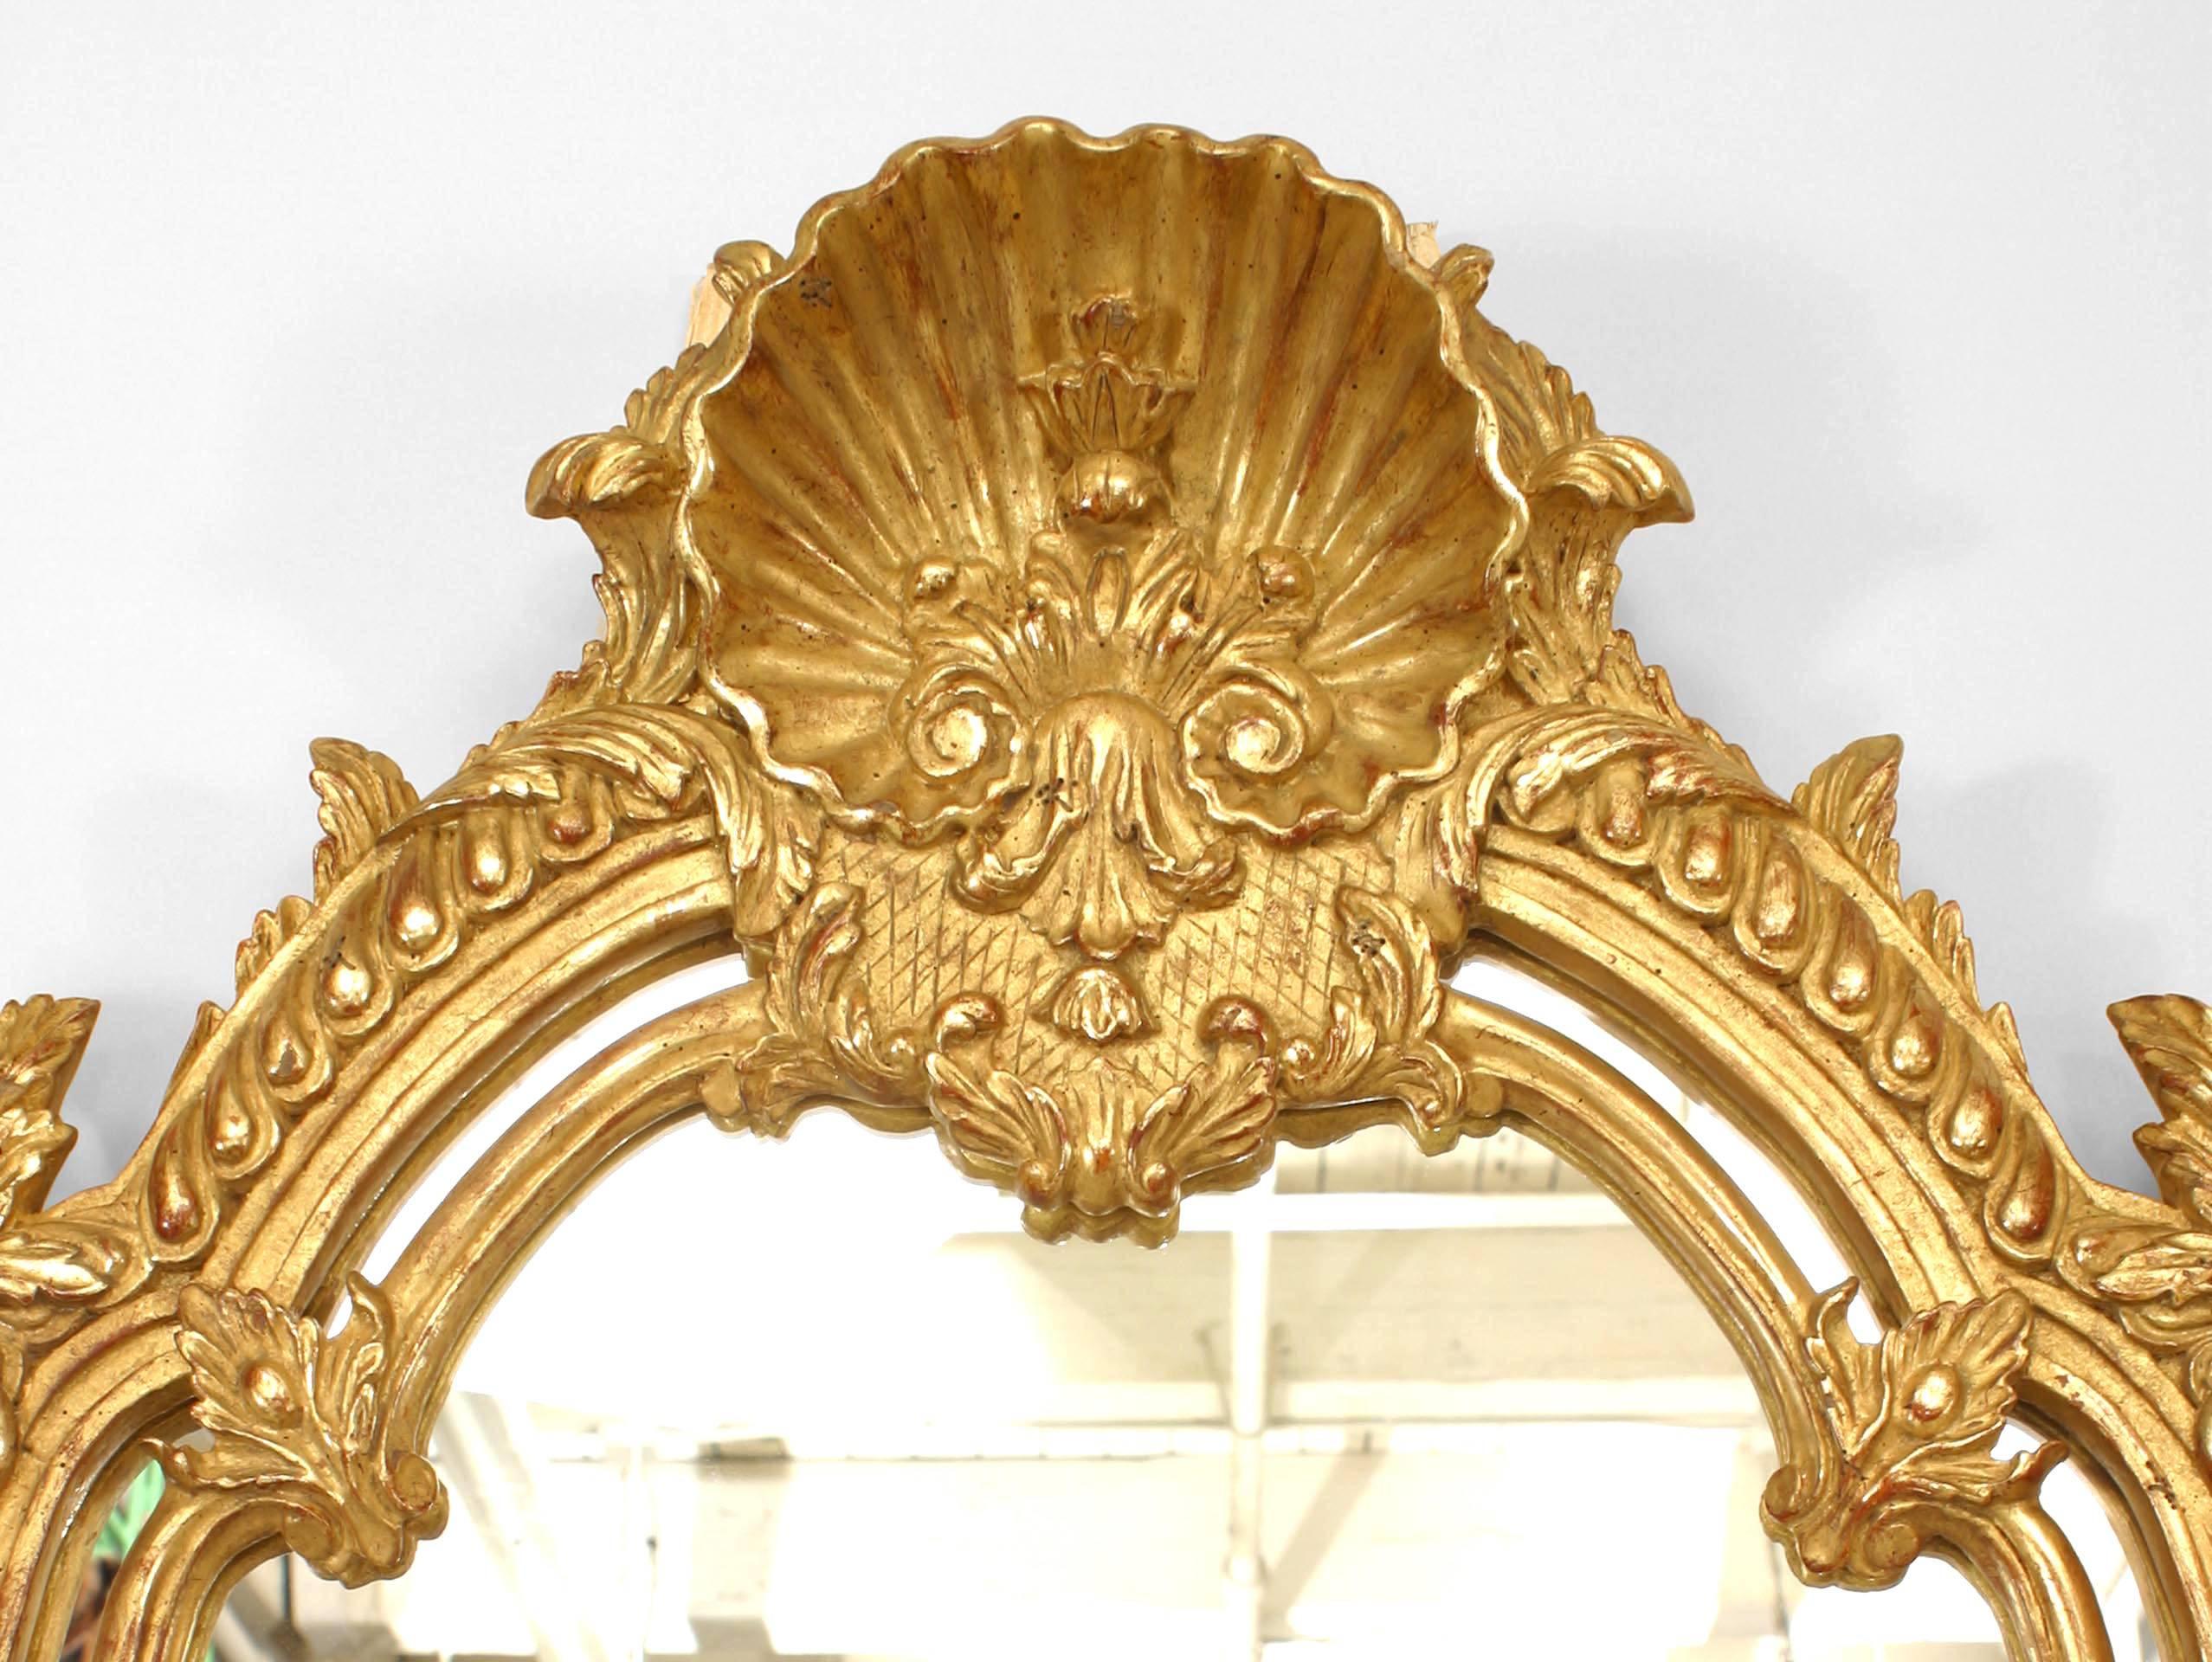 Regency Revival French Regence Style Carved Giltwood Wall Mirror